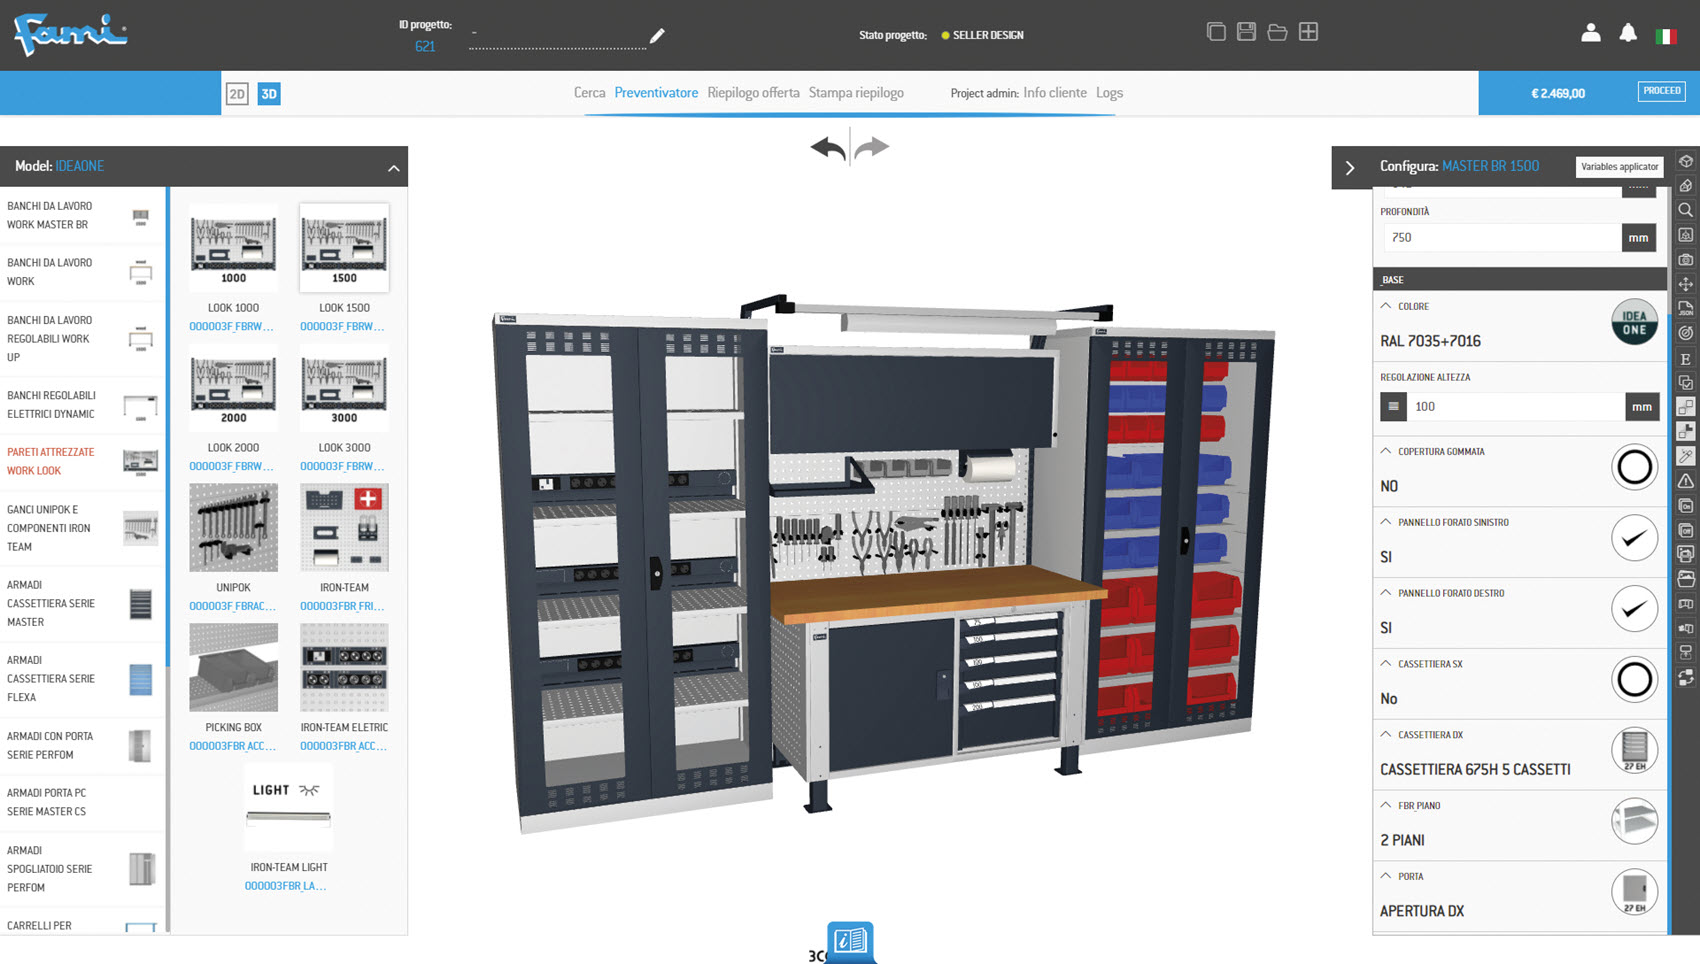 A 3D configurator interface for a workbench setup, showing various customizable components and storage options.